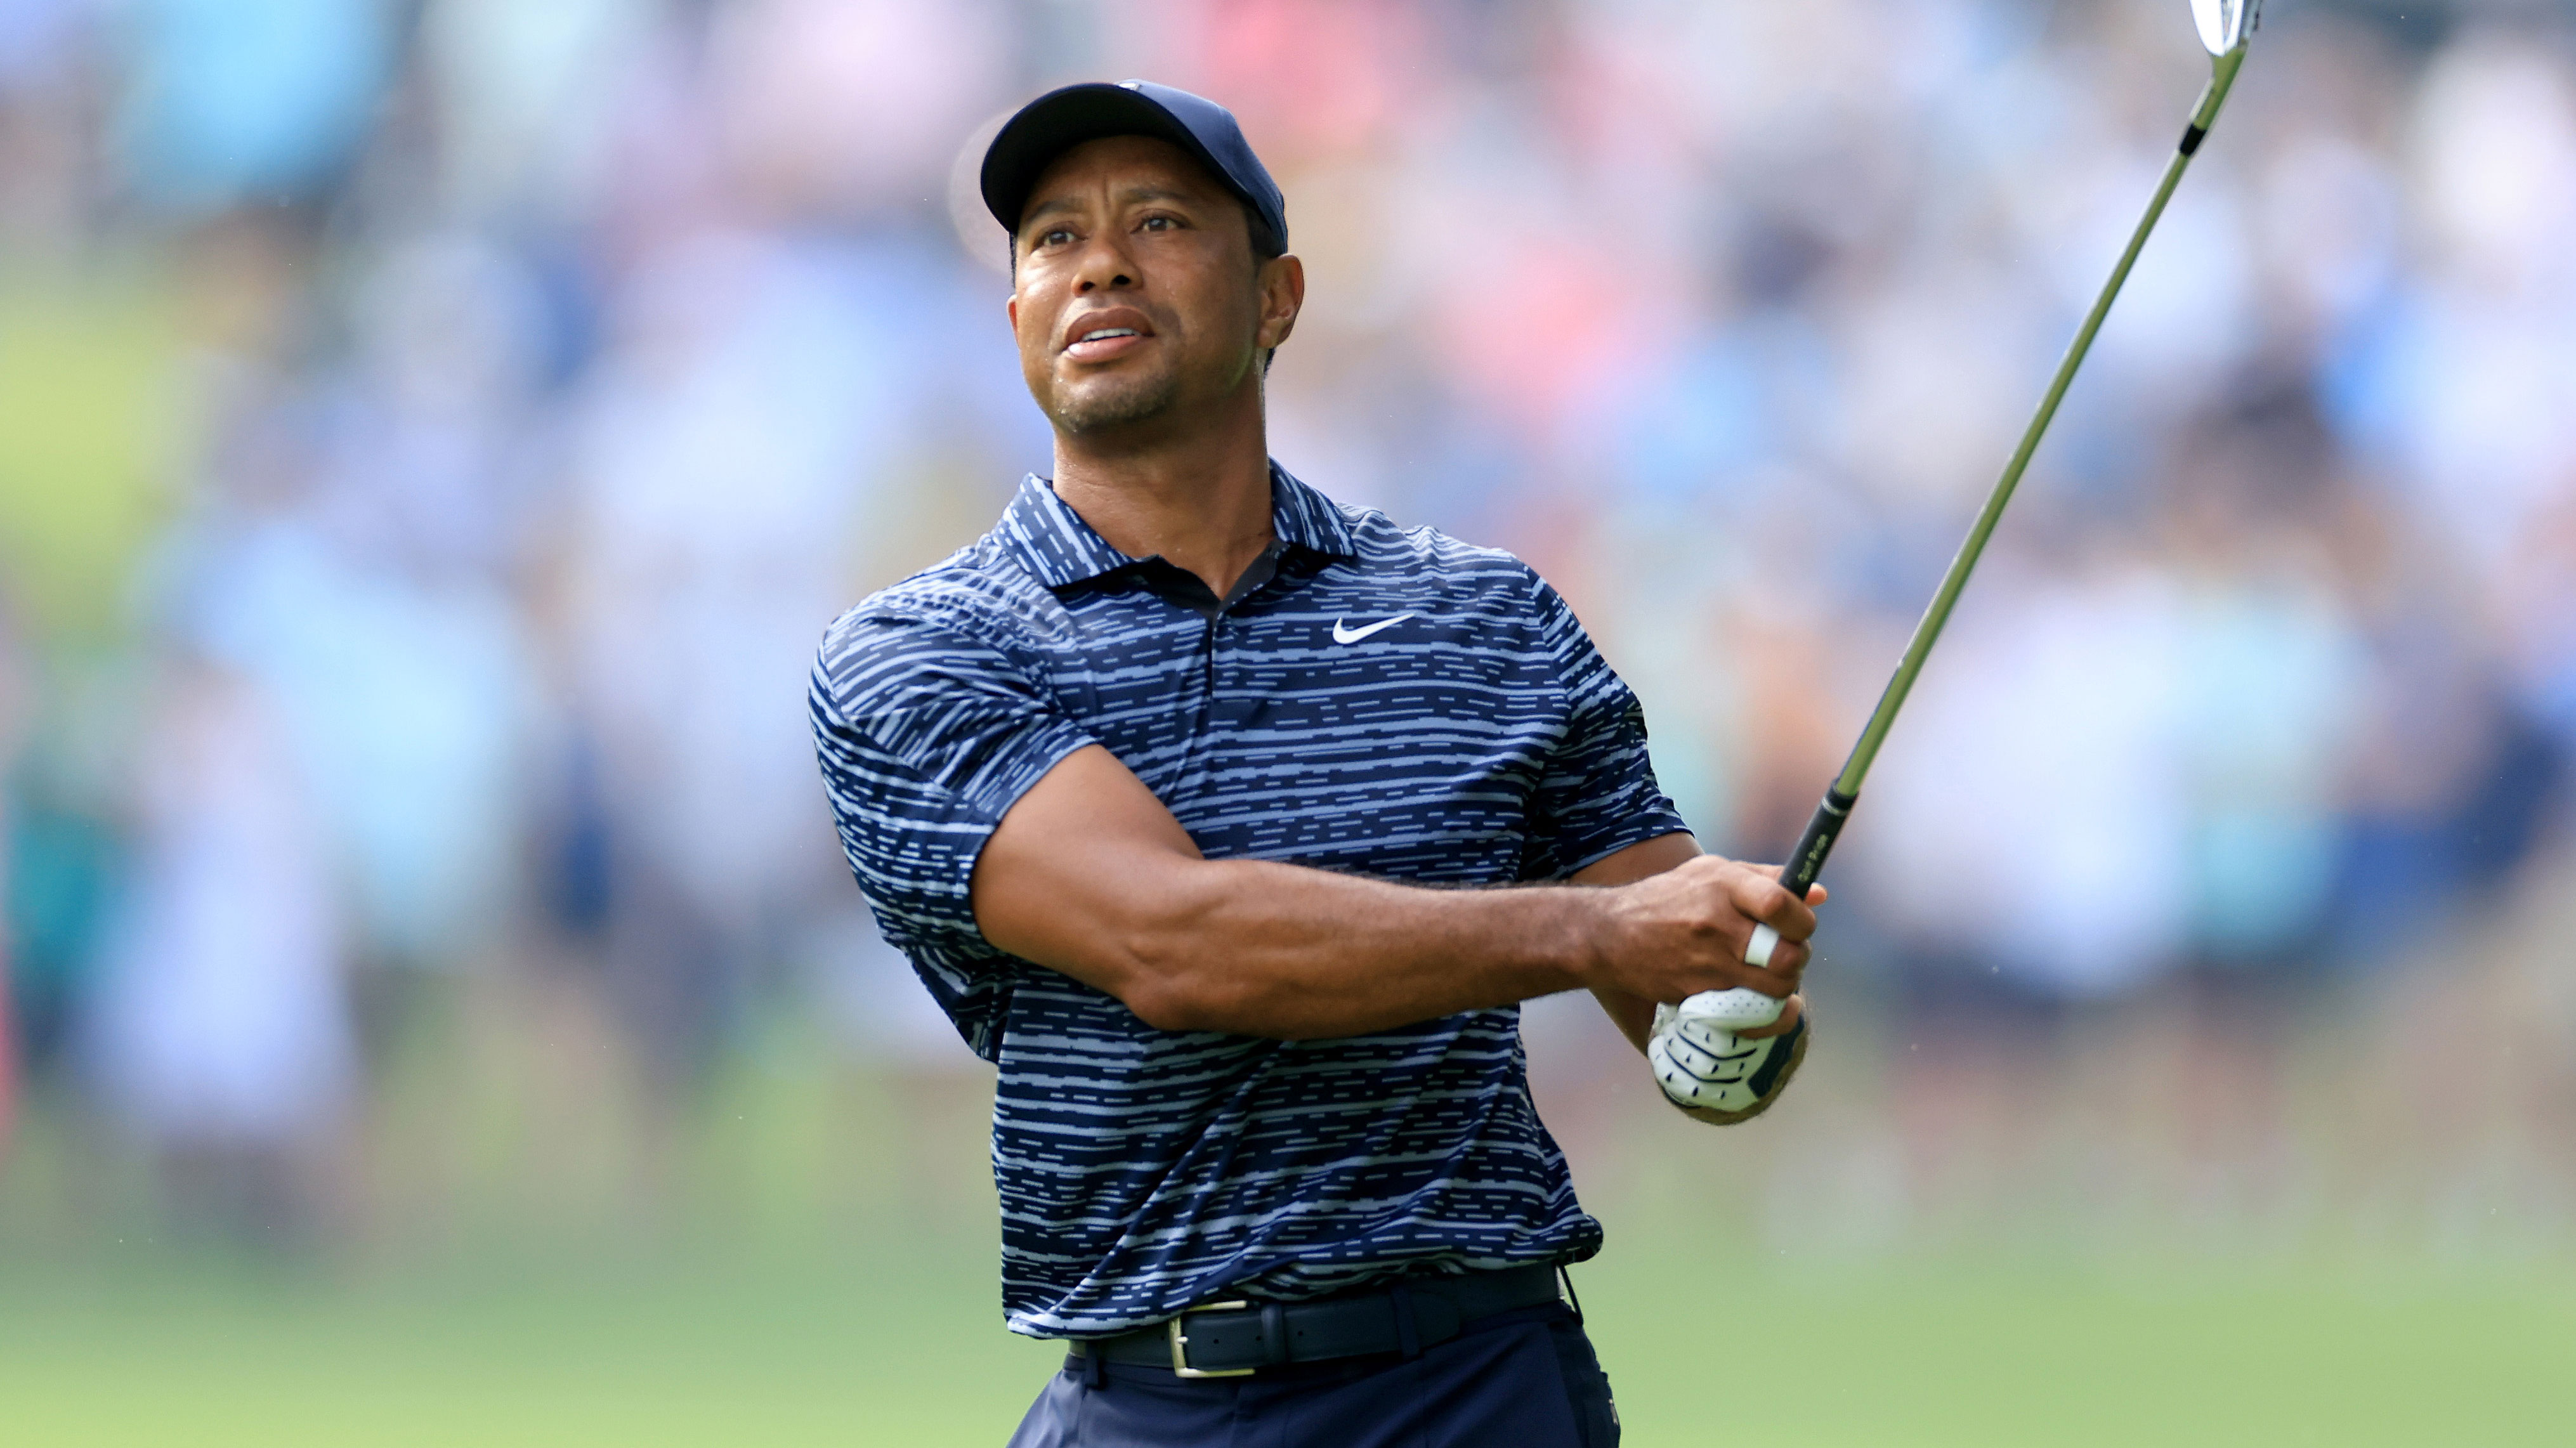 Golf news 2022 Tiger Woods says LIV golfers have turned their backs on what made them